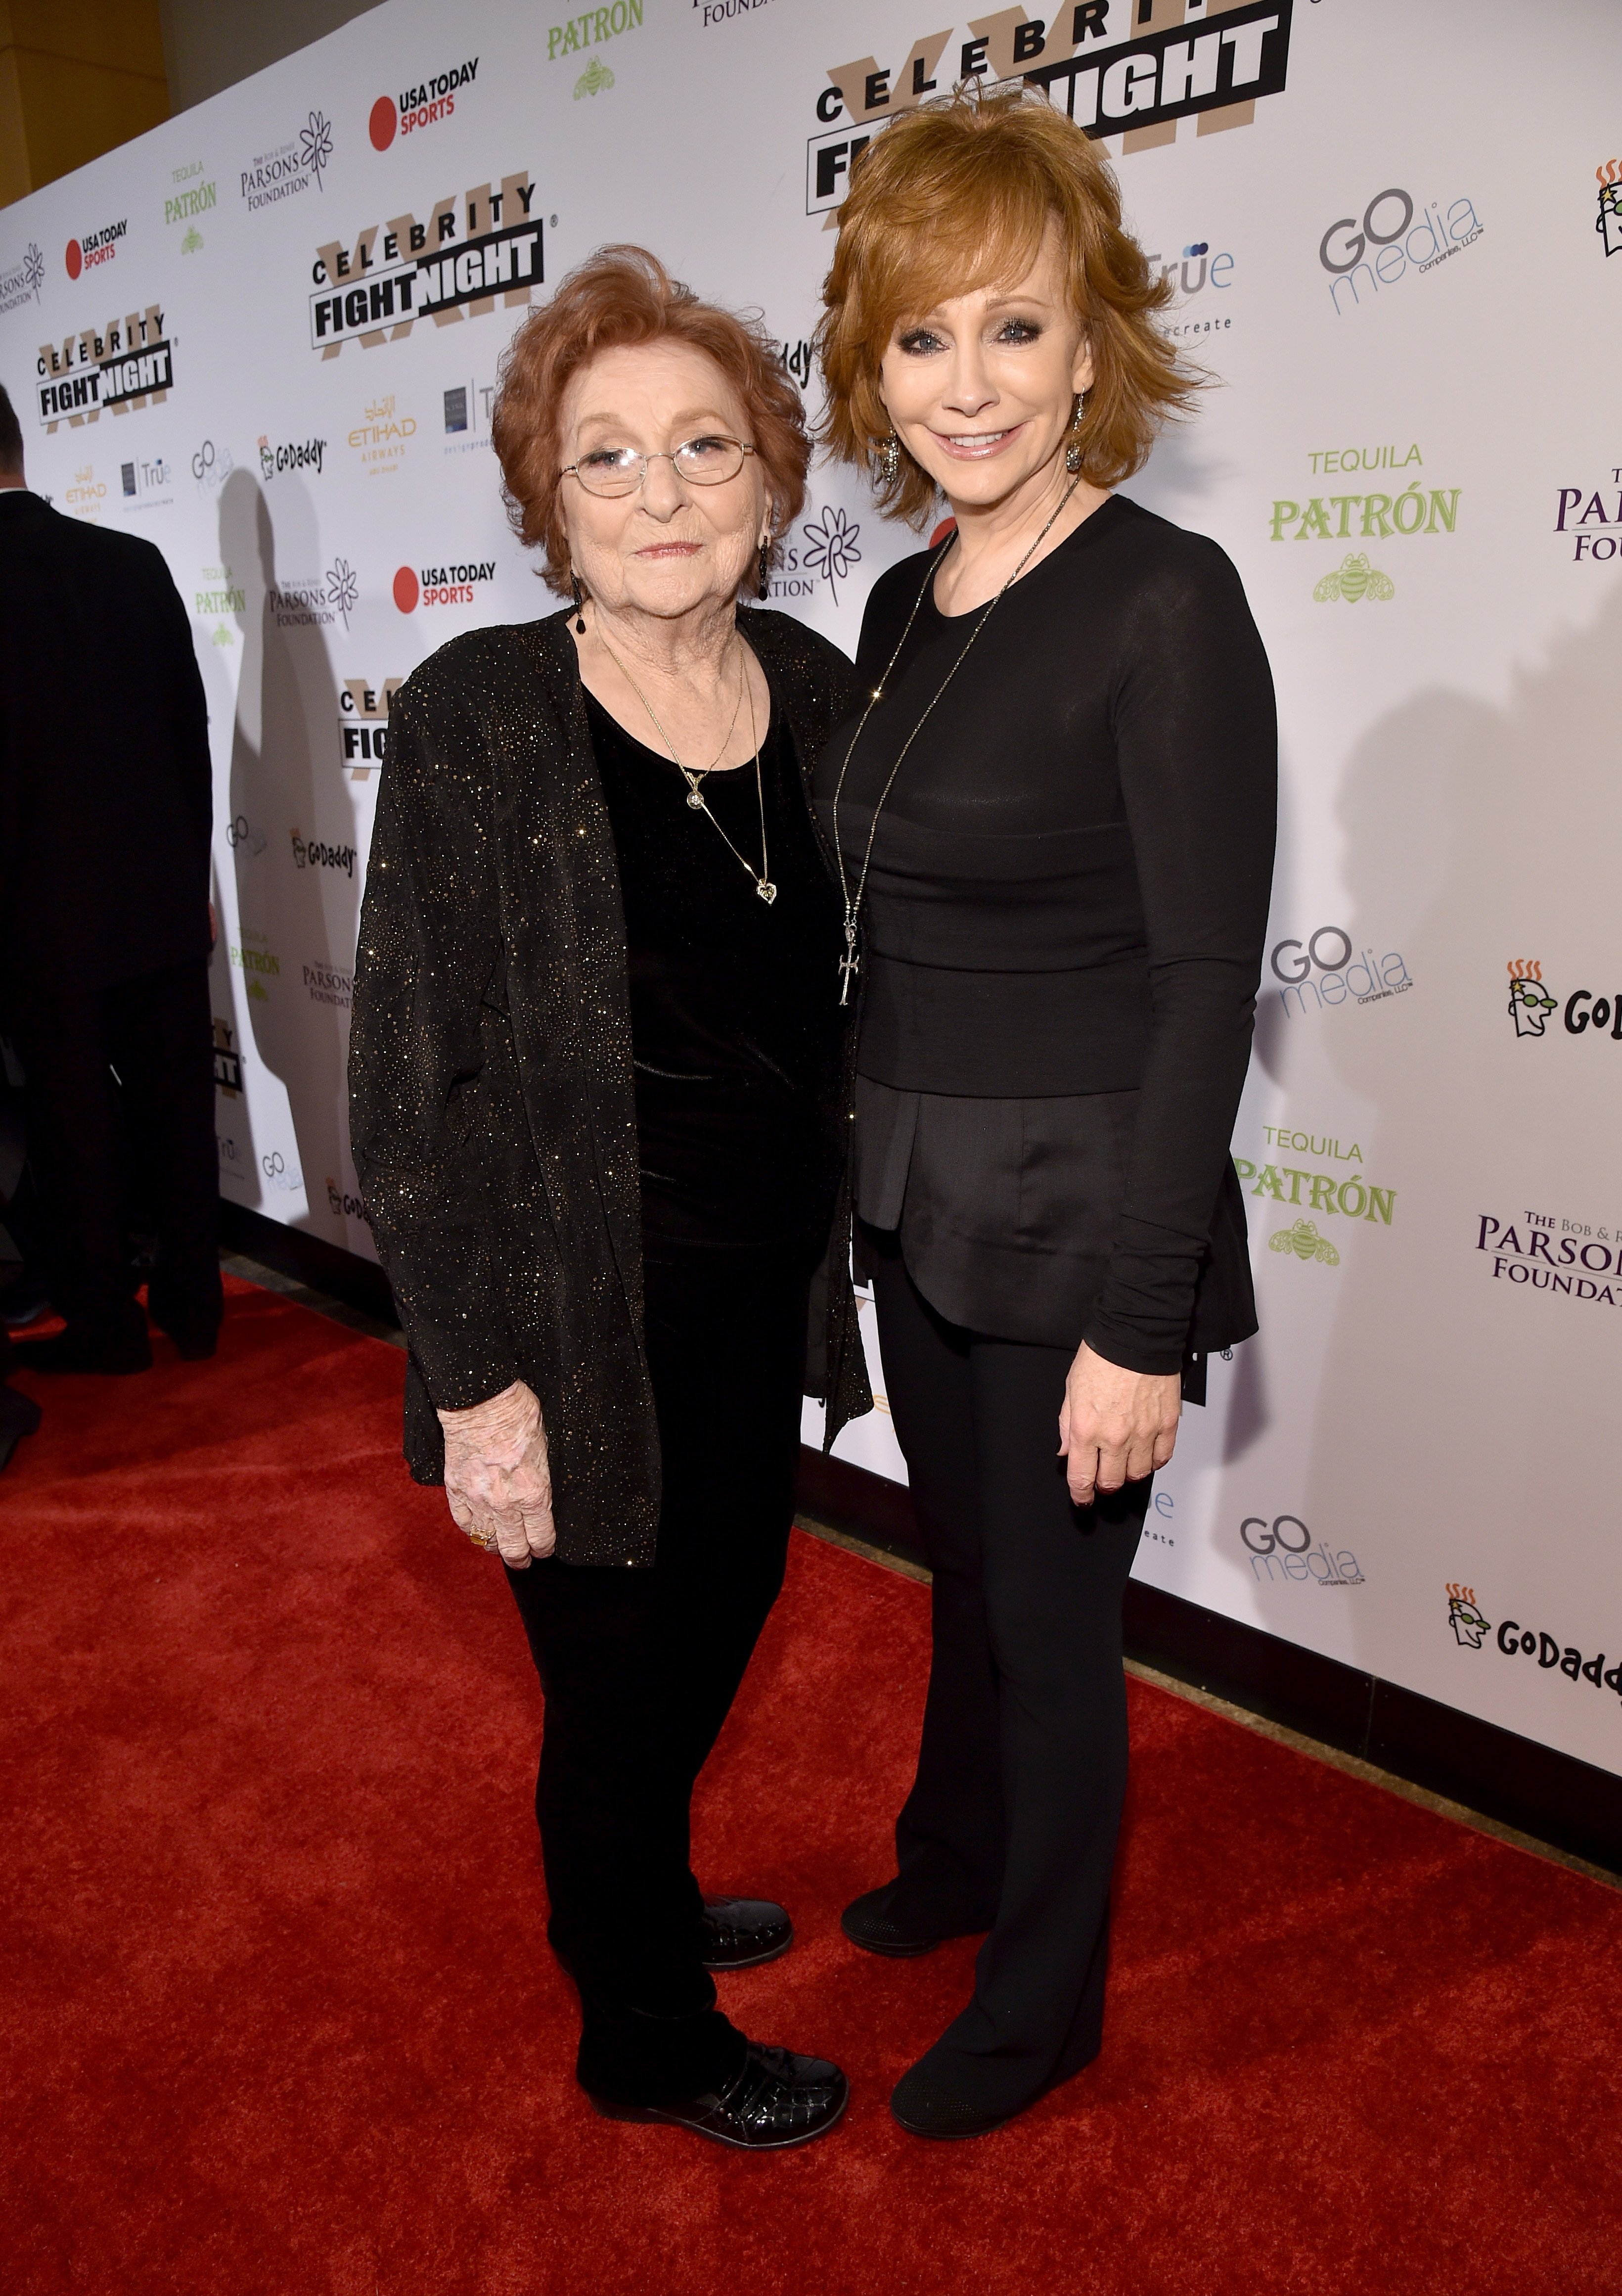 Reba McEntire and mother Jacqueline McEntire at Muhammad Ali's Celebrity Fight Night XXII at the JW Marriott Phoenix Desert Ridge Resort & Spa in Phoenix, Arizona | Photo: Mike Windle/Getty Images for Celebrity Fight Night